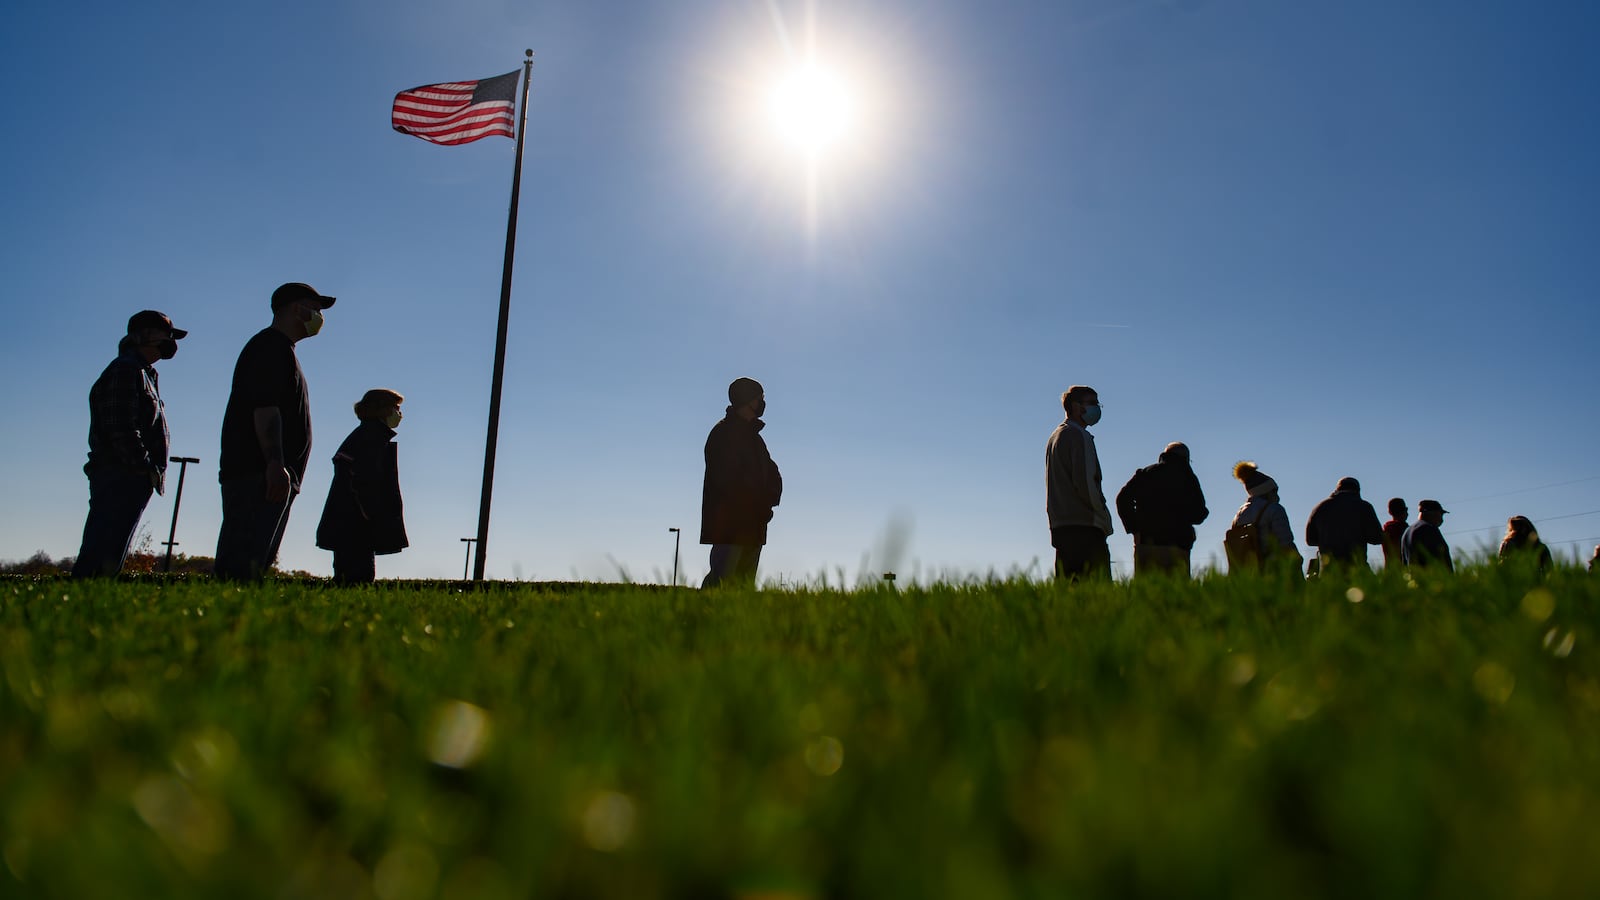 A row of people in silhouette standing on a grassy hill with a U.S. flag waving in the background